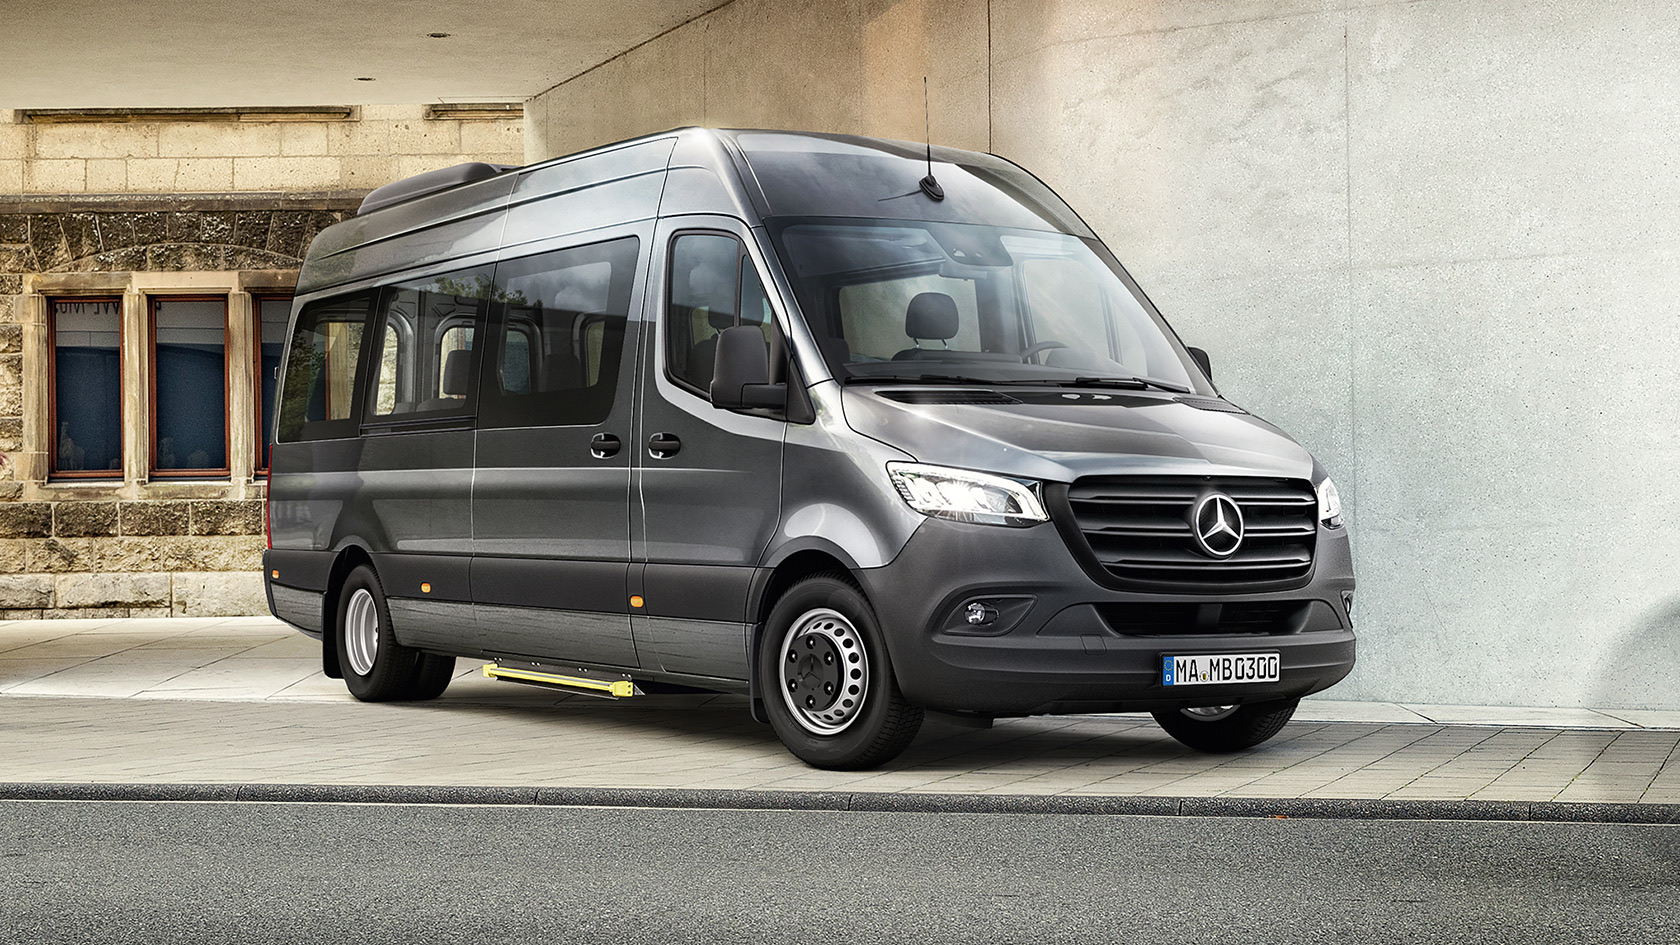 The Top Benefits of Choosing Minibus Hire for Corporate Events